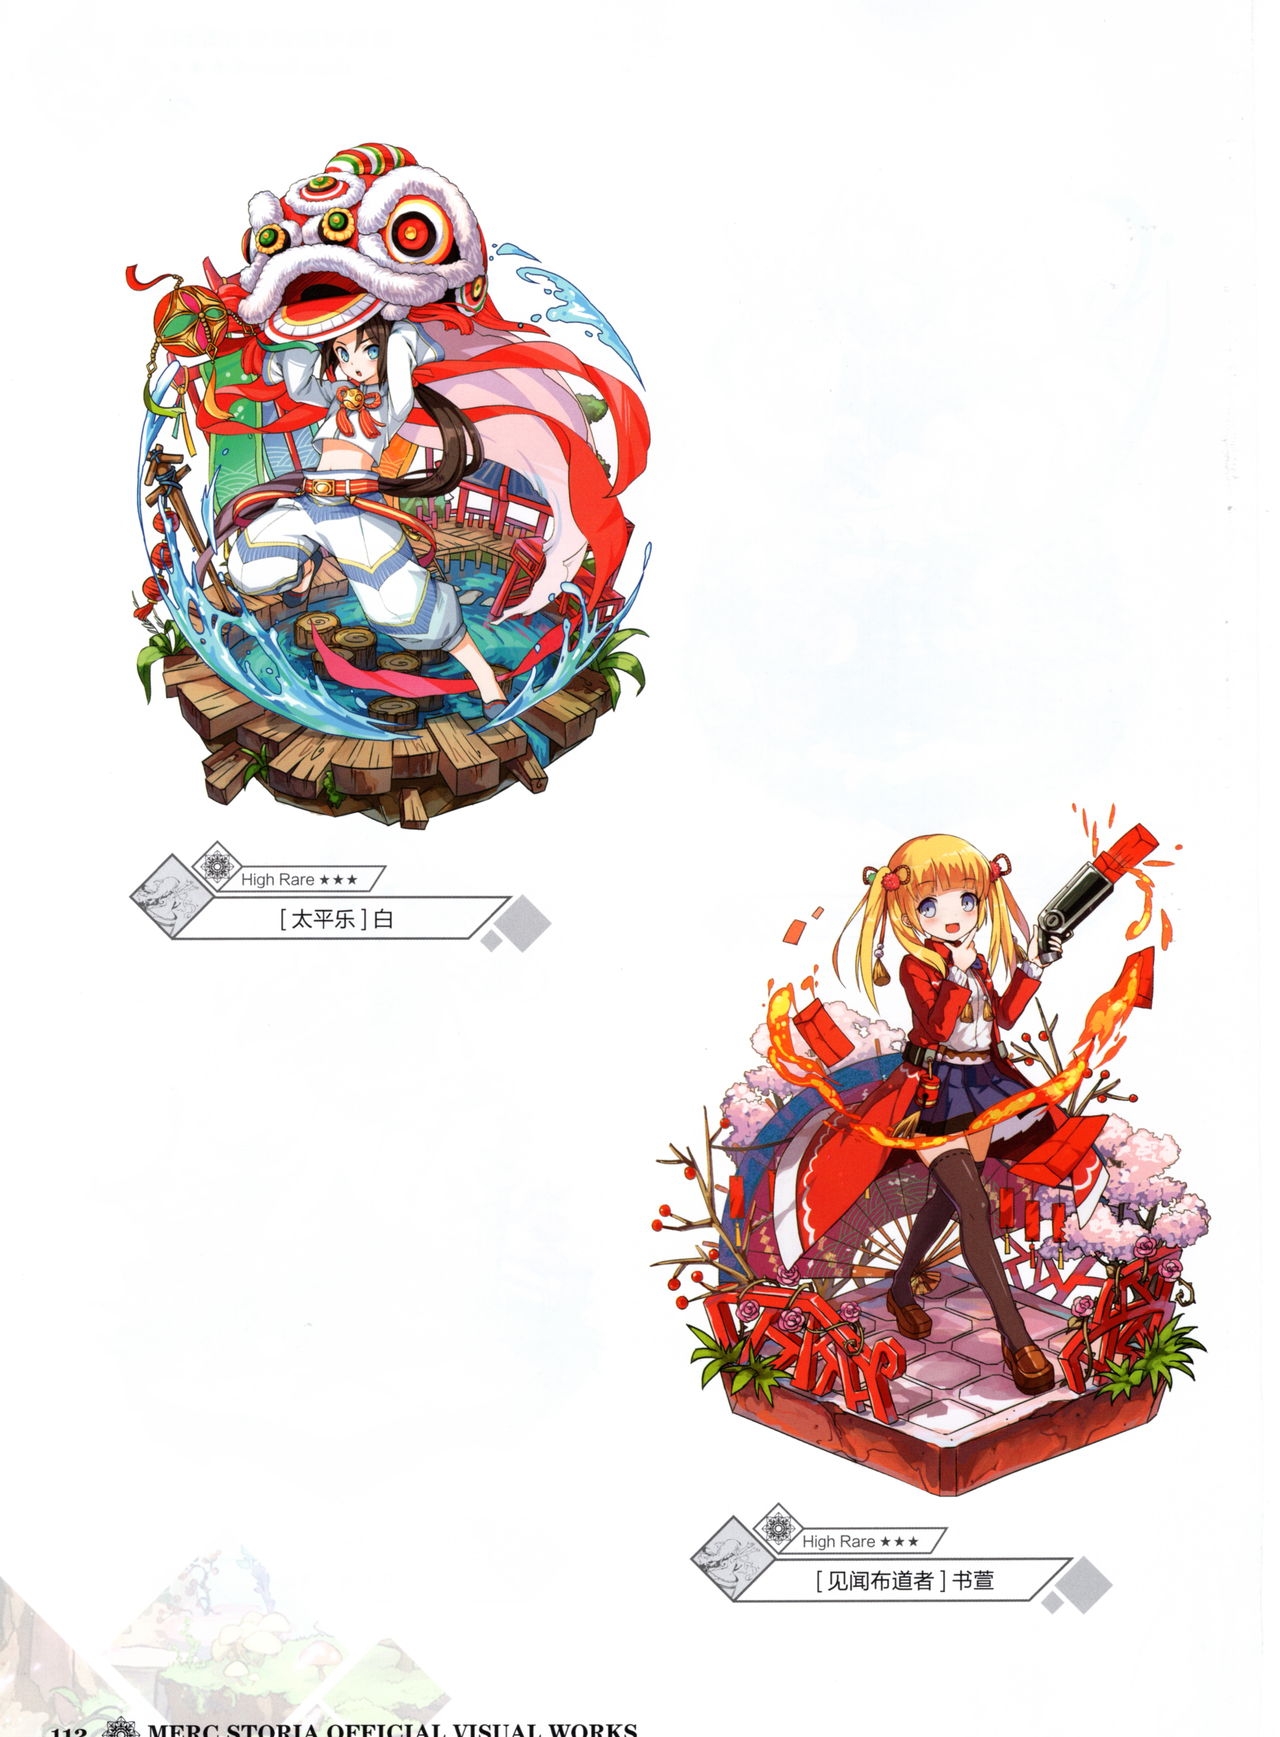 Merc Storia Official Visual Works [Chinese] 114